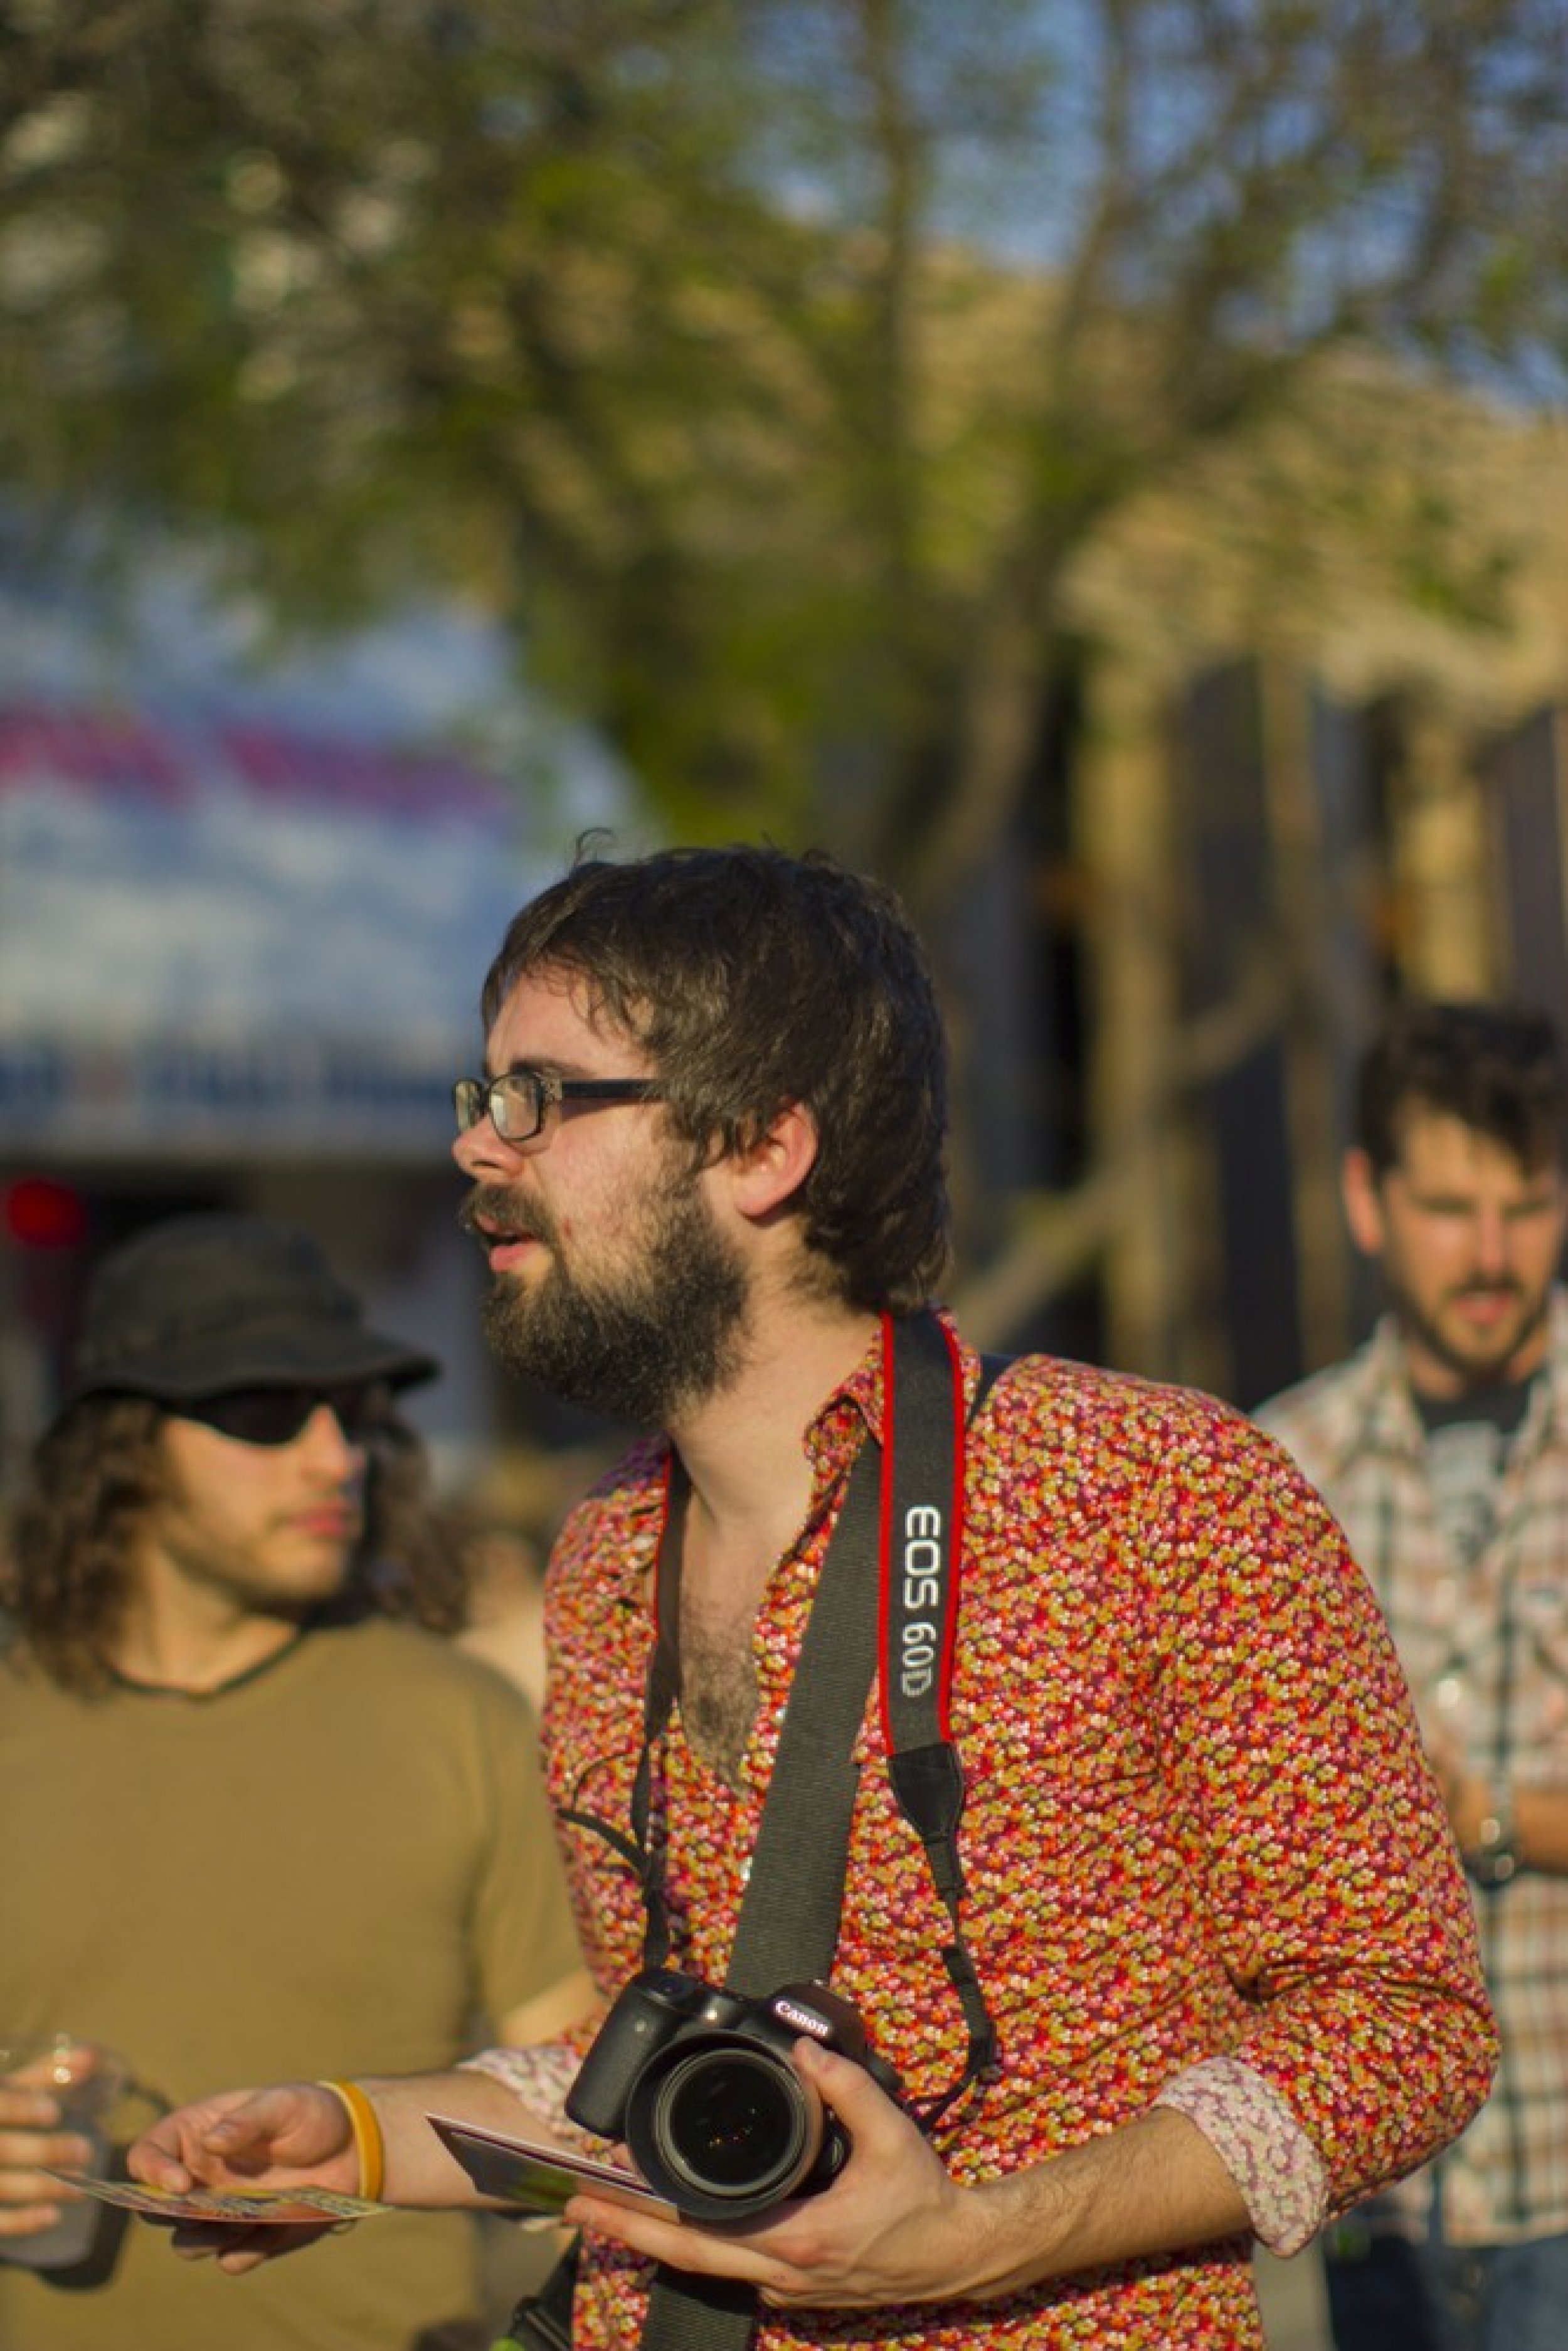 23 Photos of People With Cameras at SXSW 2012 